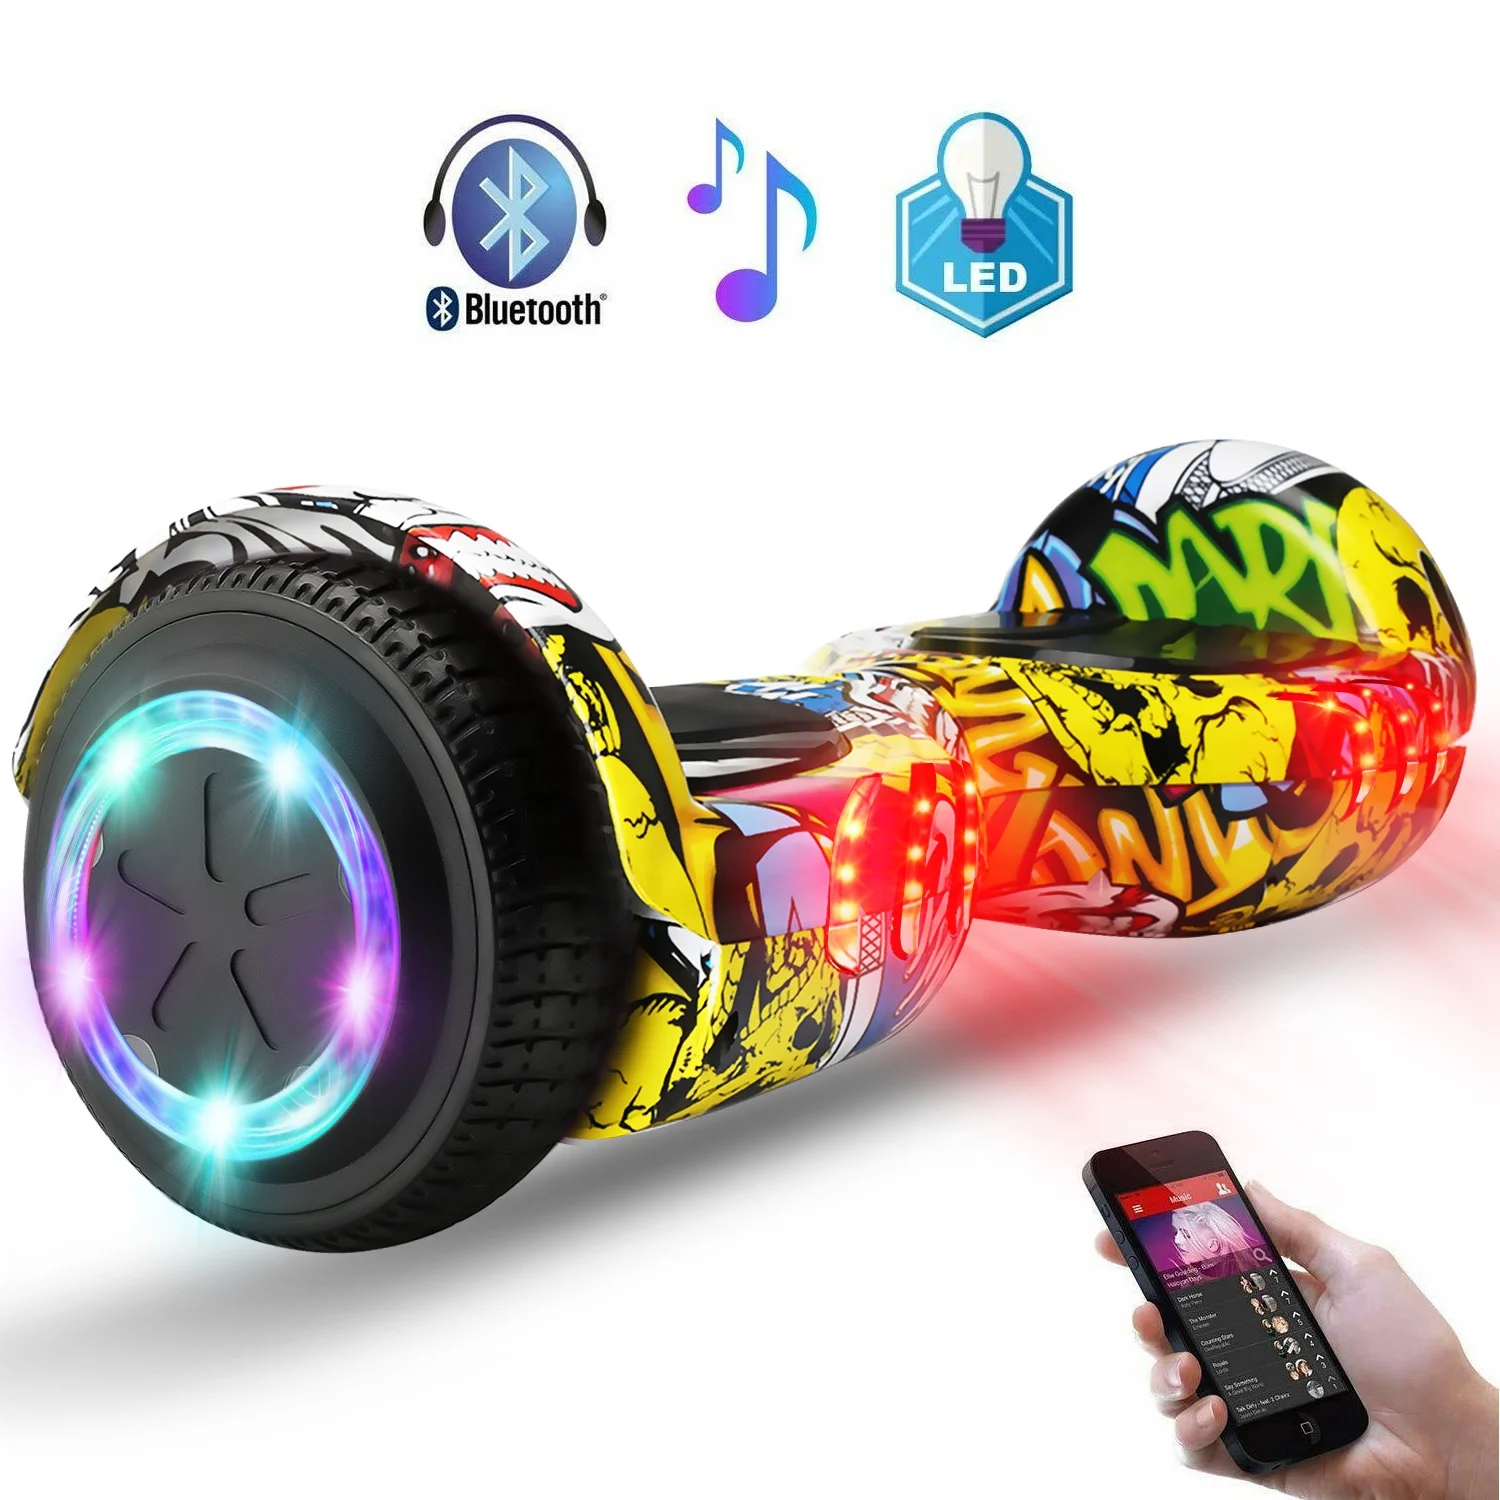 

Self Balancing Scooter Smart Two Wheels Hoverboard Free Shipping UK/GER Warehouse 8.5 Inch with CE Certified 201-500w Electric, Yellow